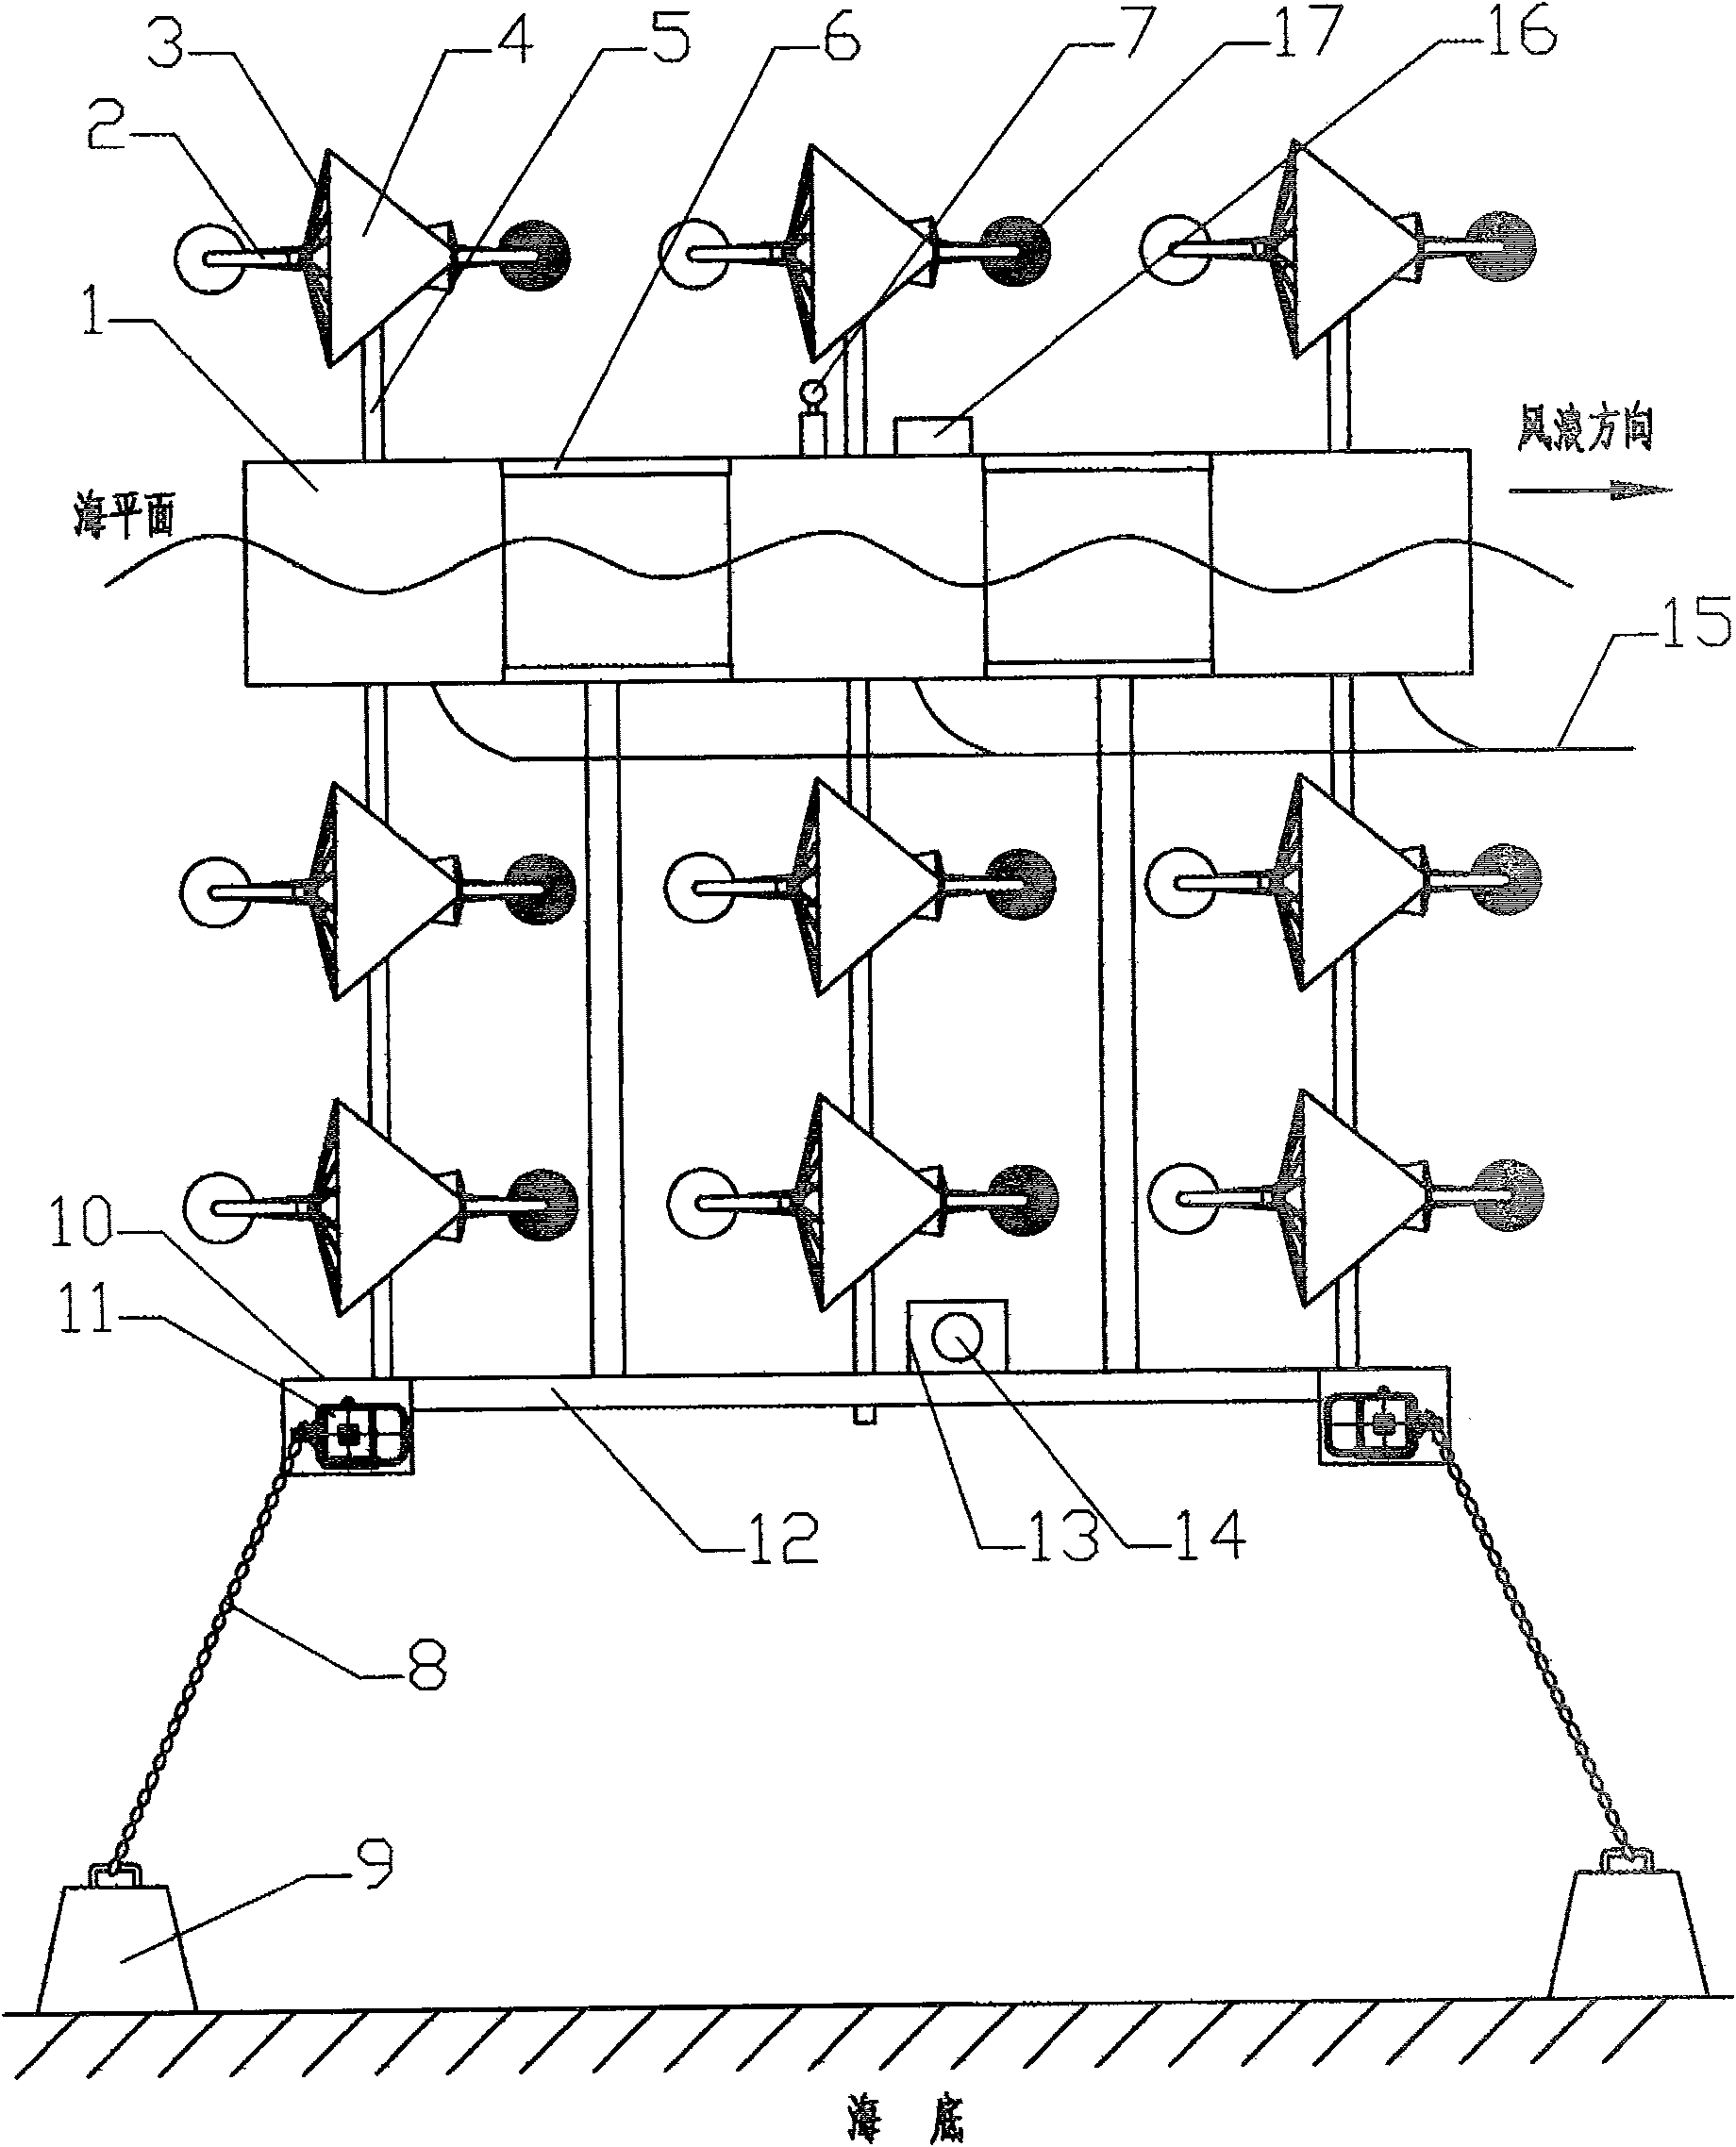 Array type sea breeze, sea wave double-acting electric generating apparatus